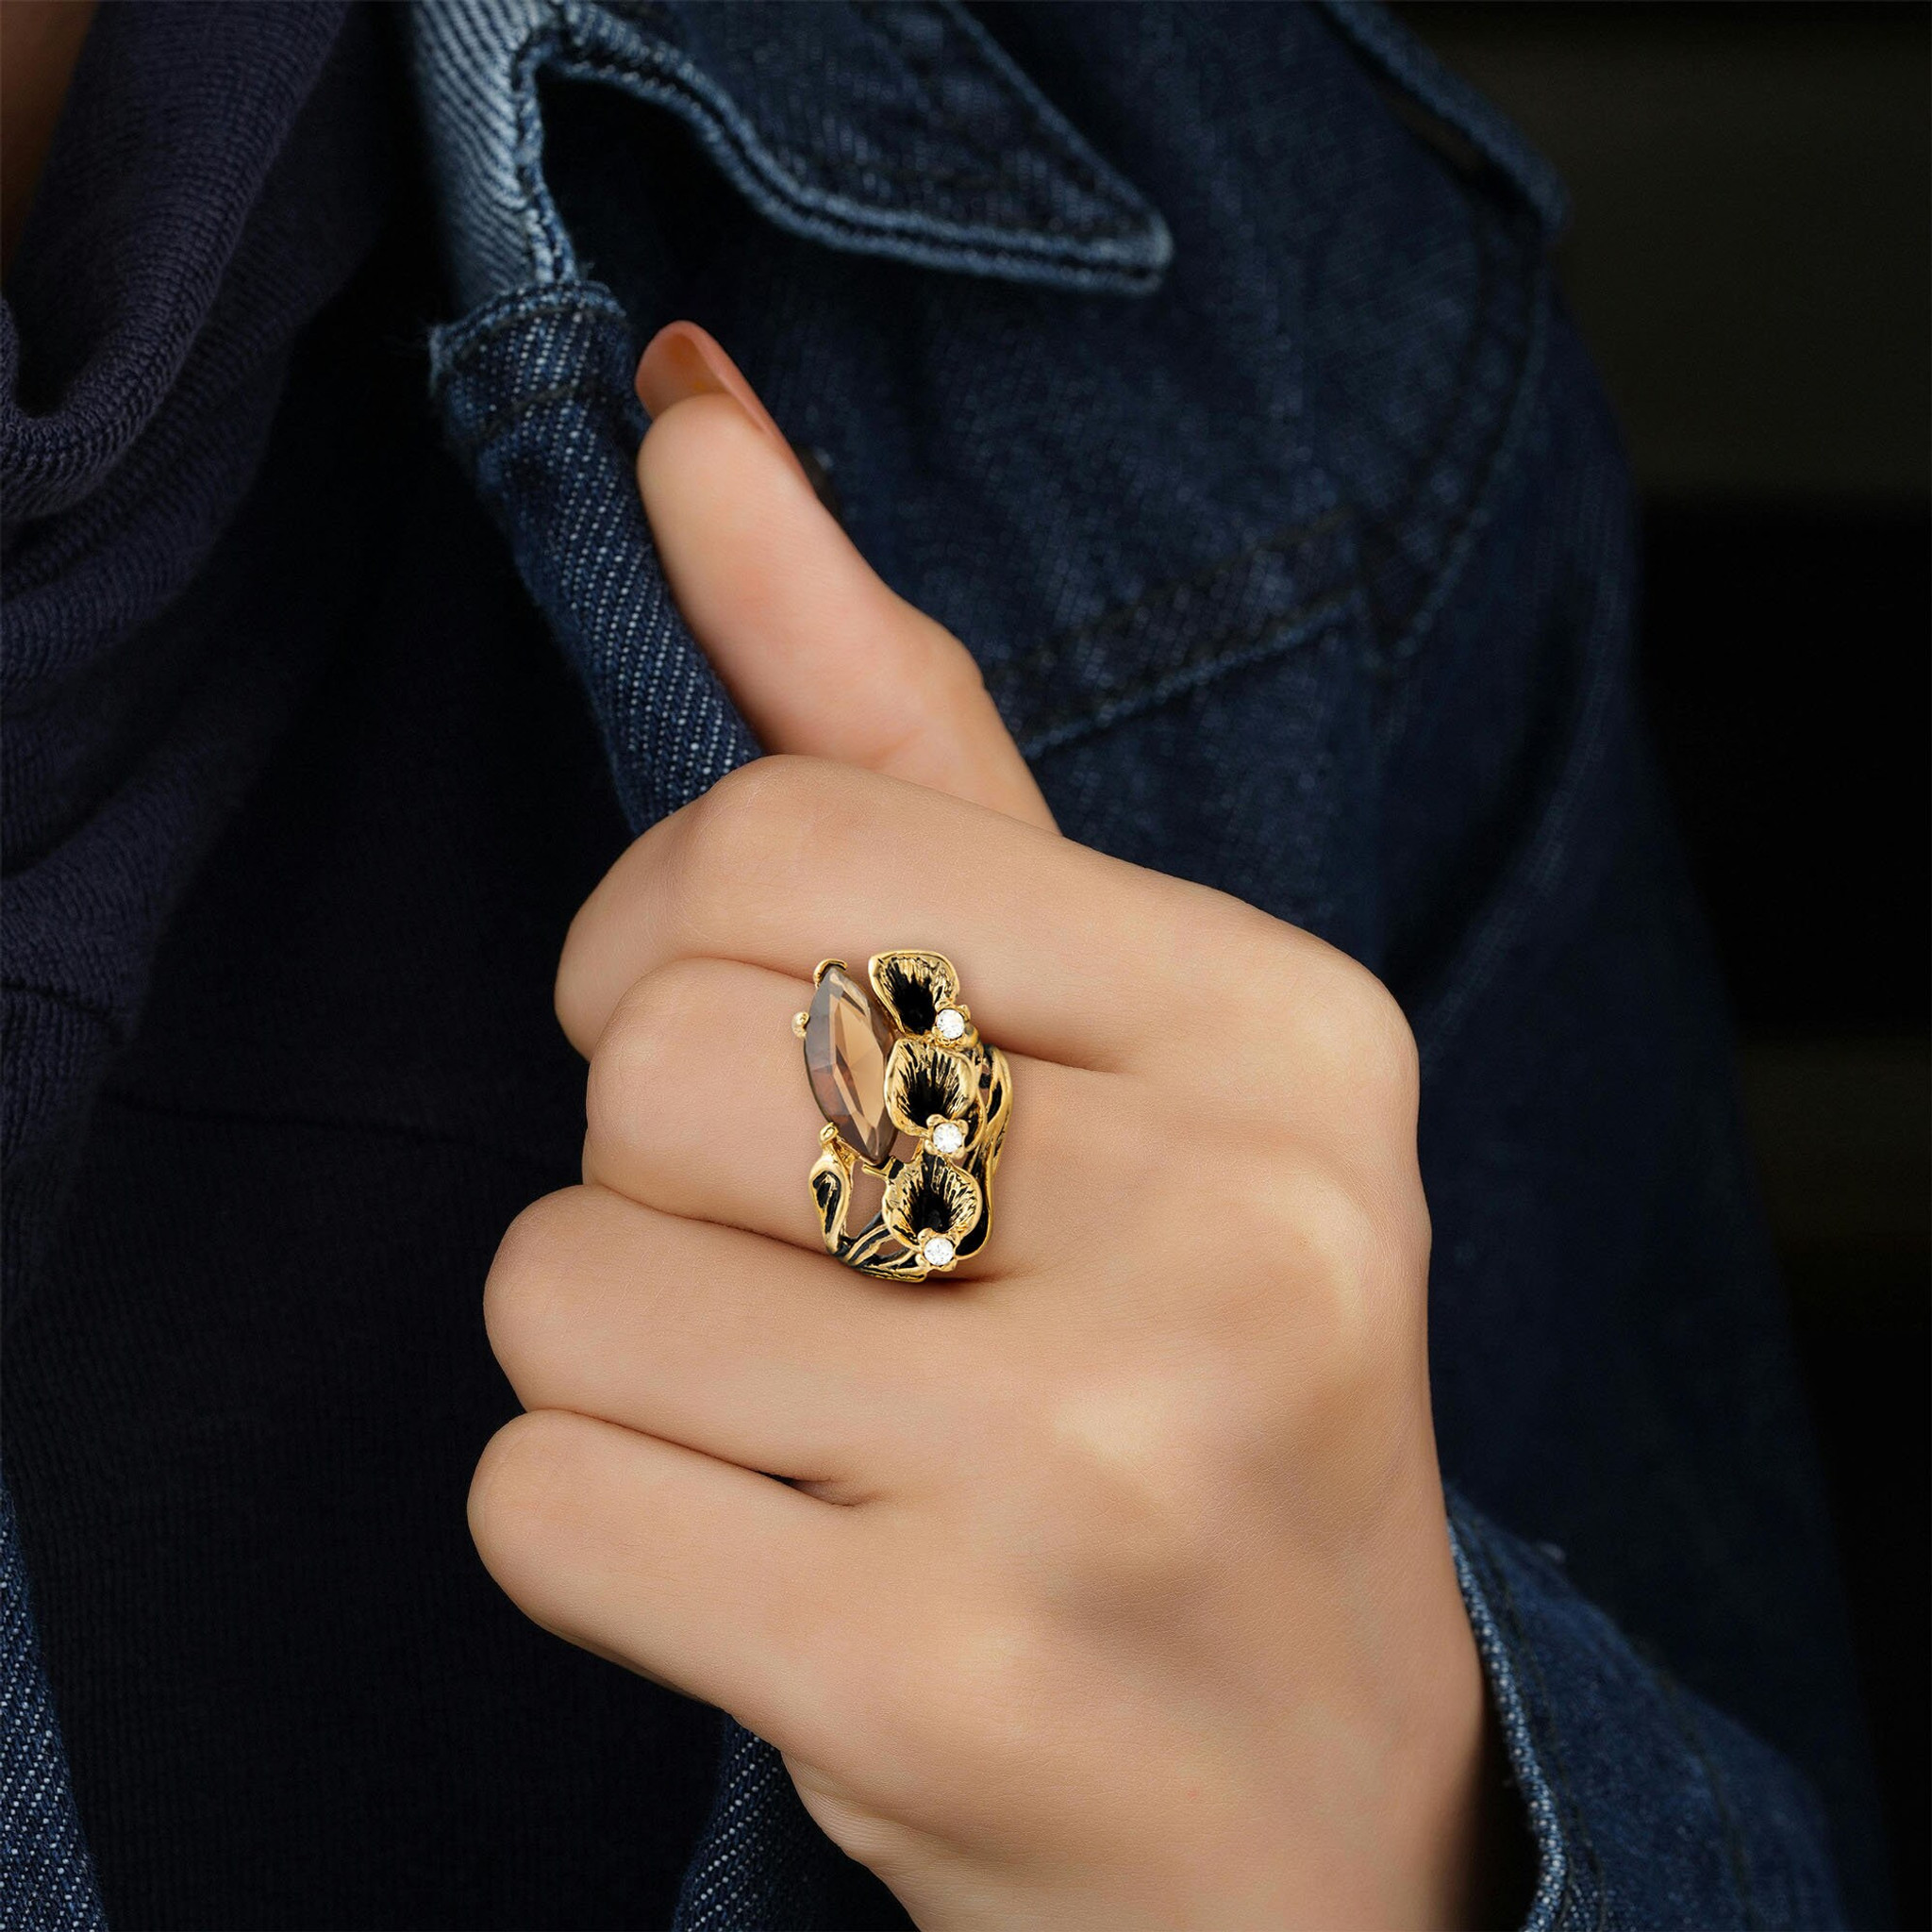 Costume Jewelry Ring into the Real Thing and Why You Should - Calla Gold  Jewelry